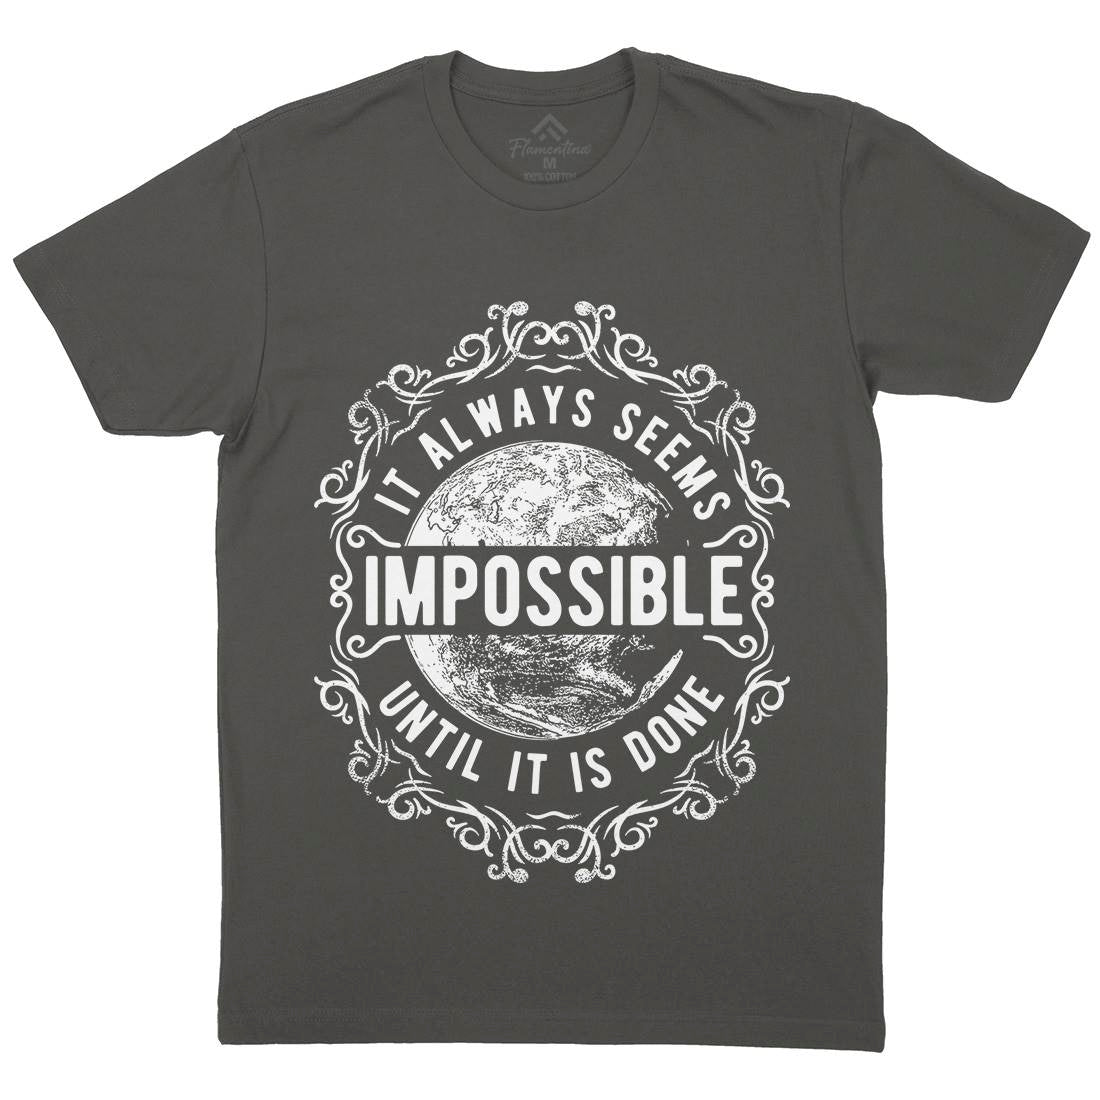 Always Seems Impossible Mens Crew Neck T-Shirt Quotes C900